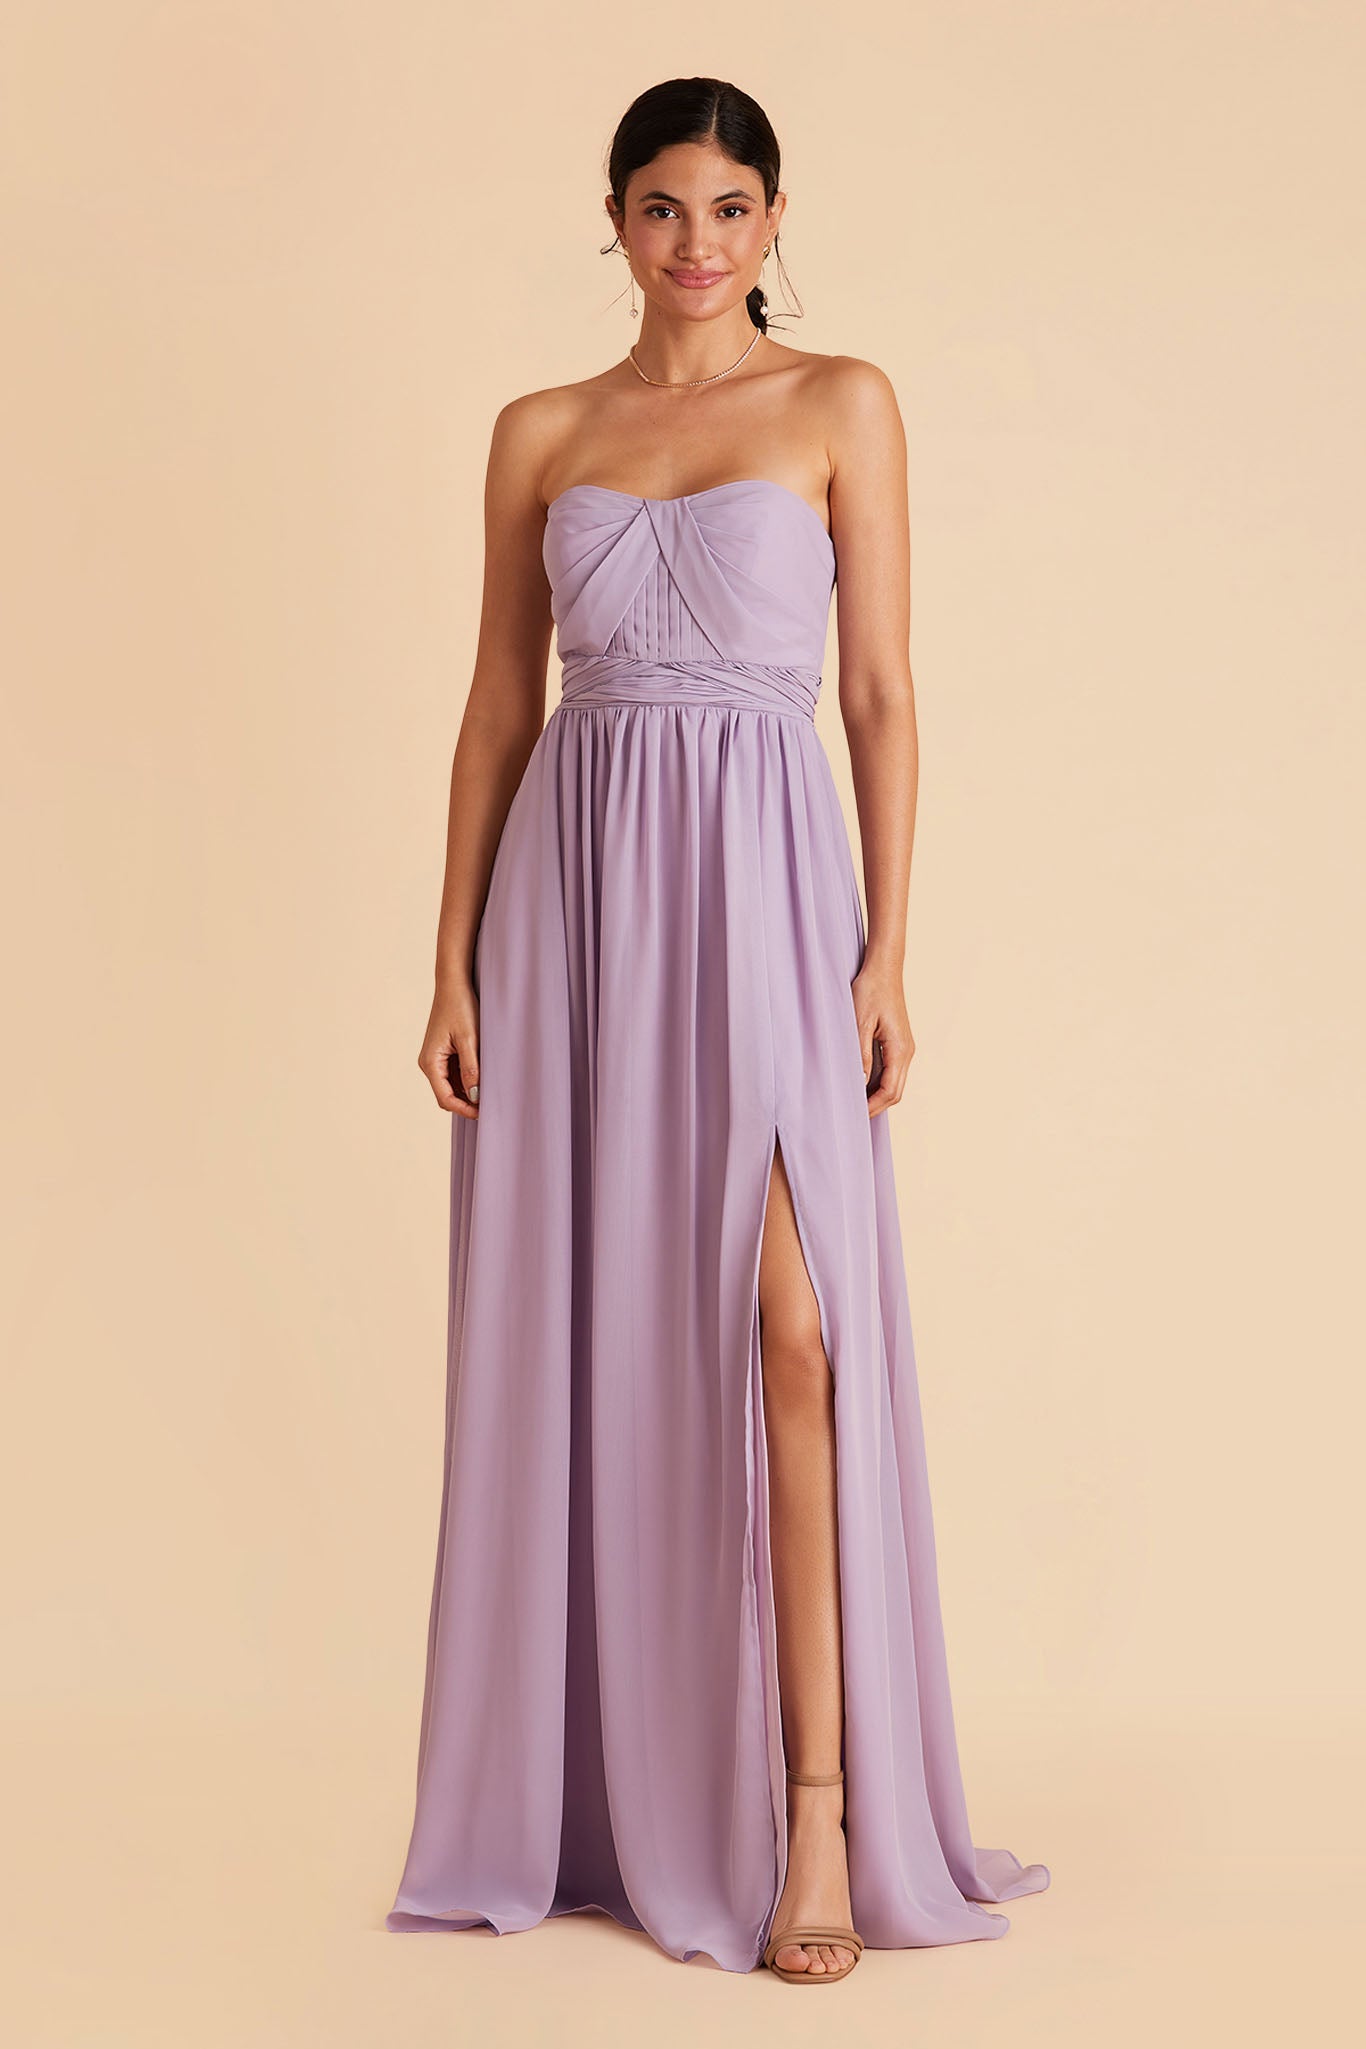 Grace convertible bridesmaid dress in Lavender Chiffon by Birdy Grey, front view